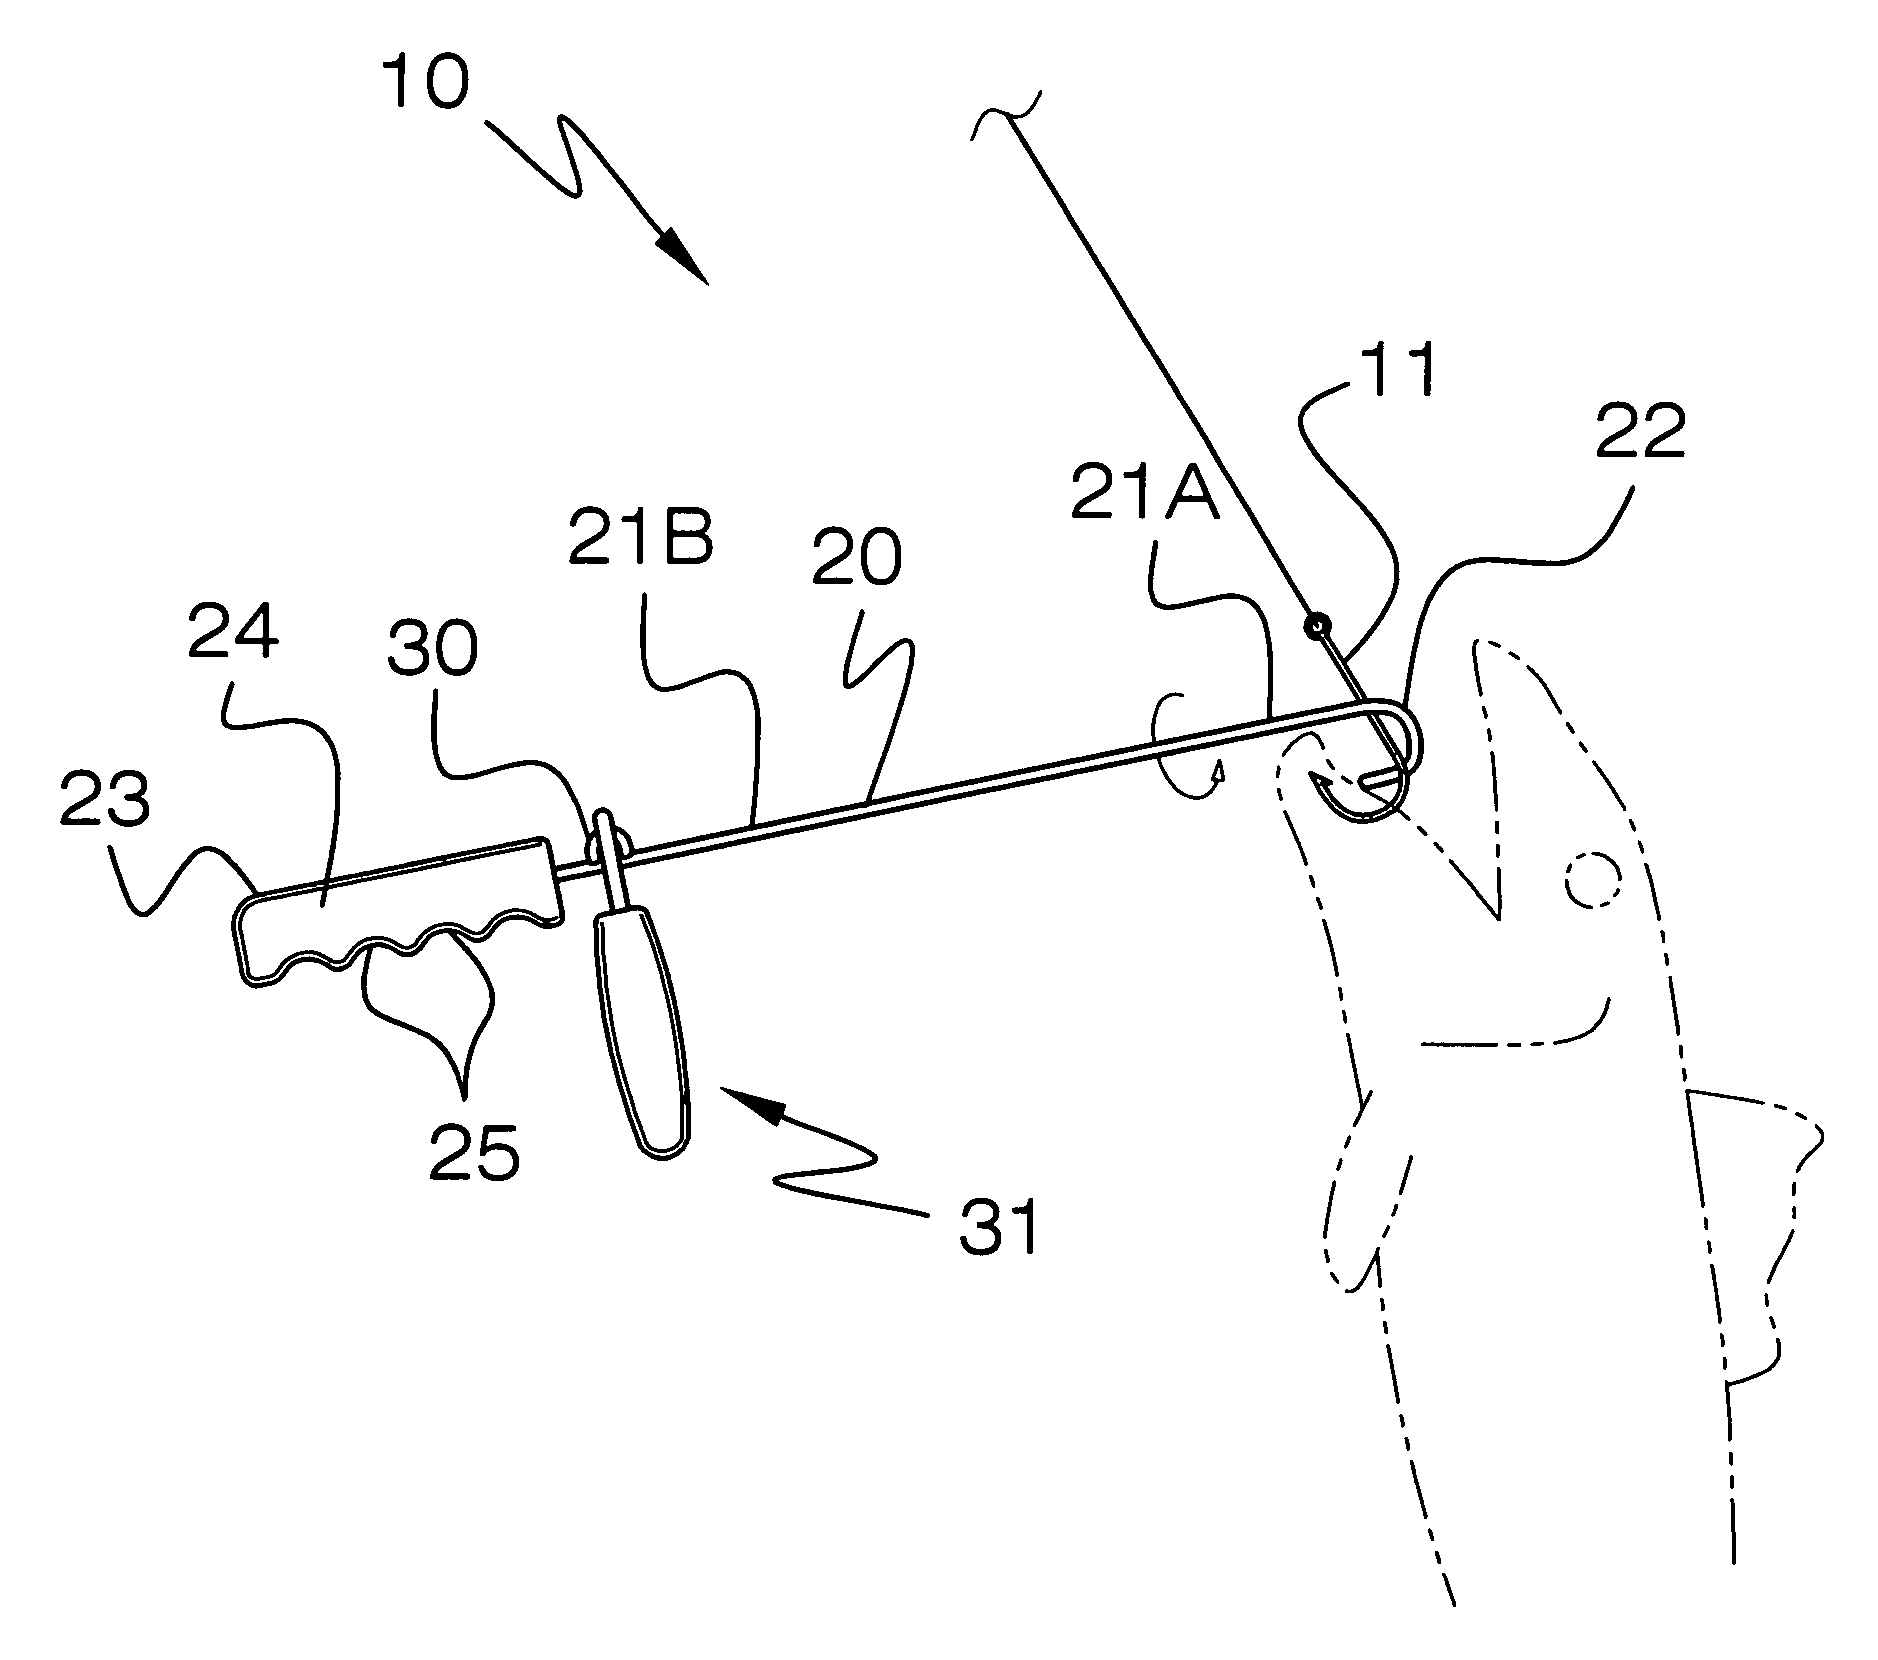 Two-handed fish hook removal apparatus